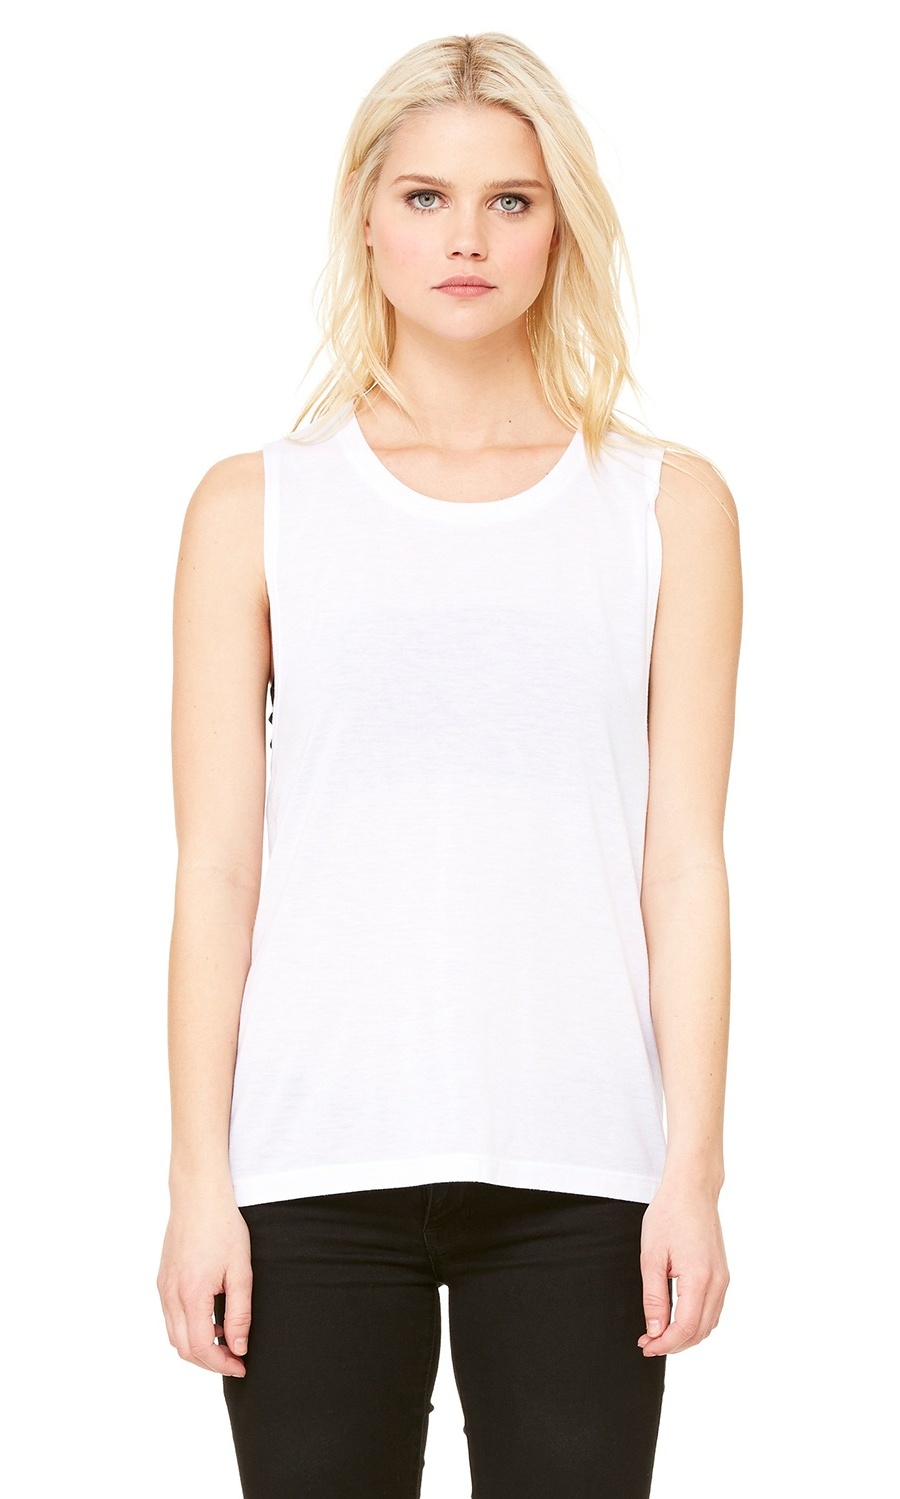 The Bella + Canvas Ladies Flowy Scoop Muscle Tank Top - WHITE - 2XL ...